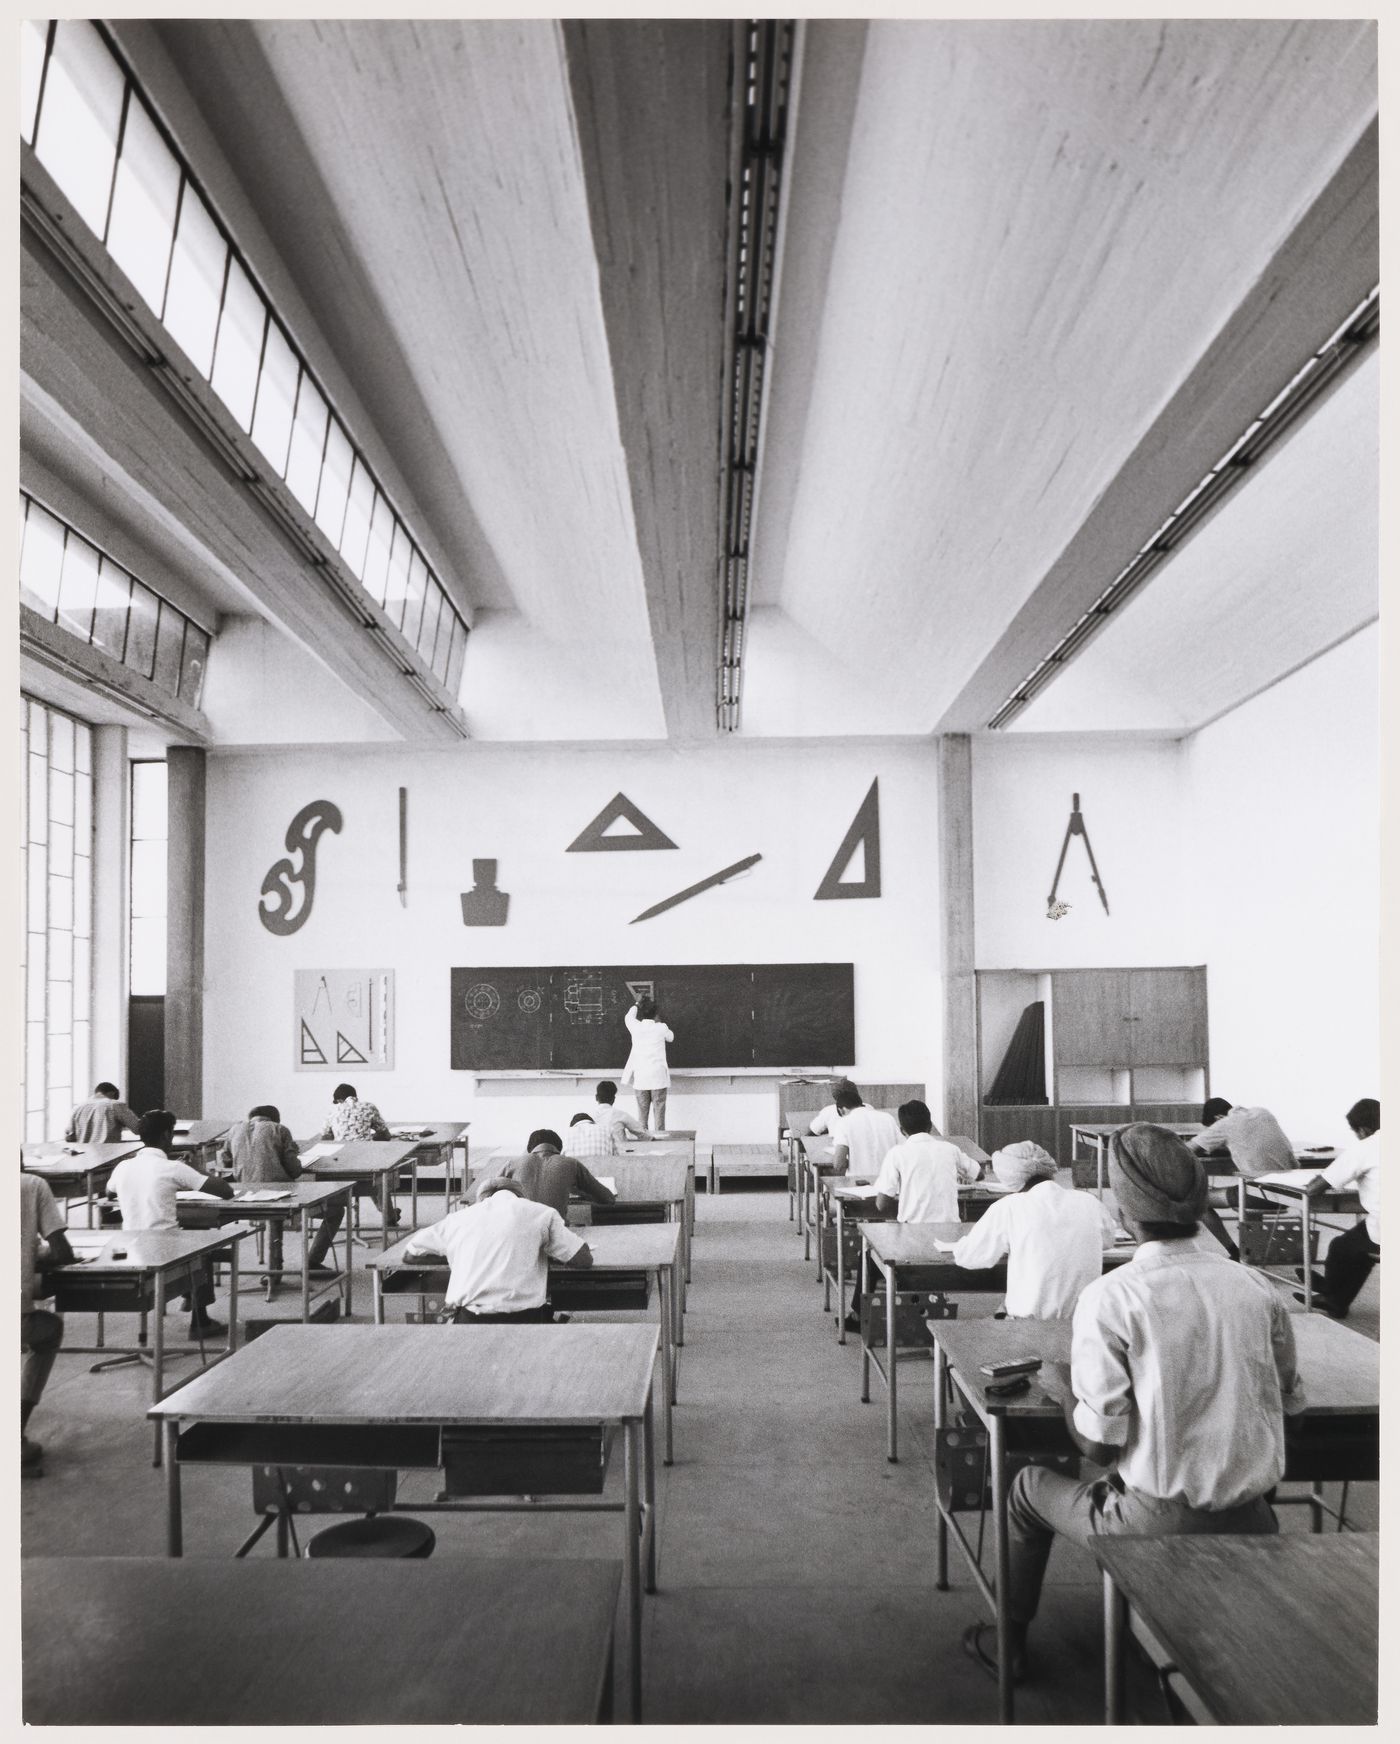 Interior of the College of Architecture, Sector 12, Chandigarh, India